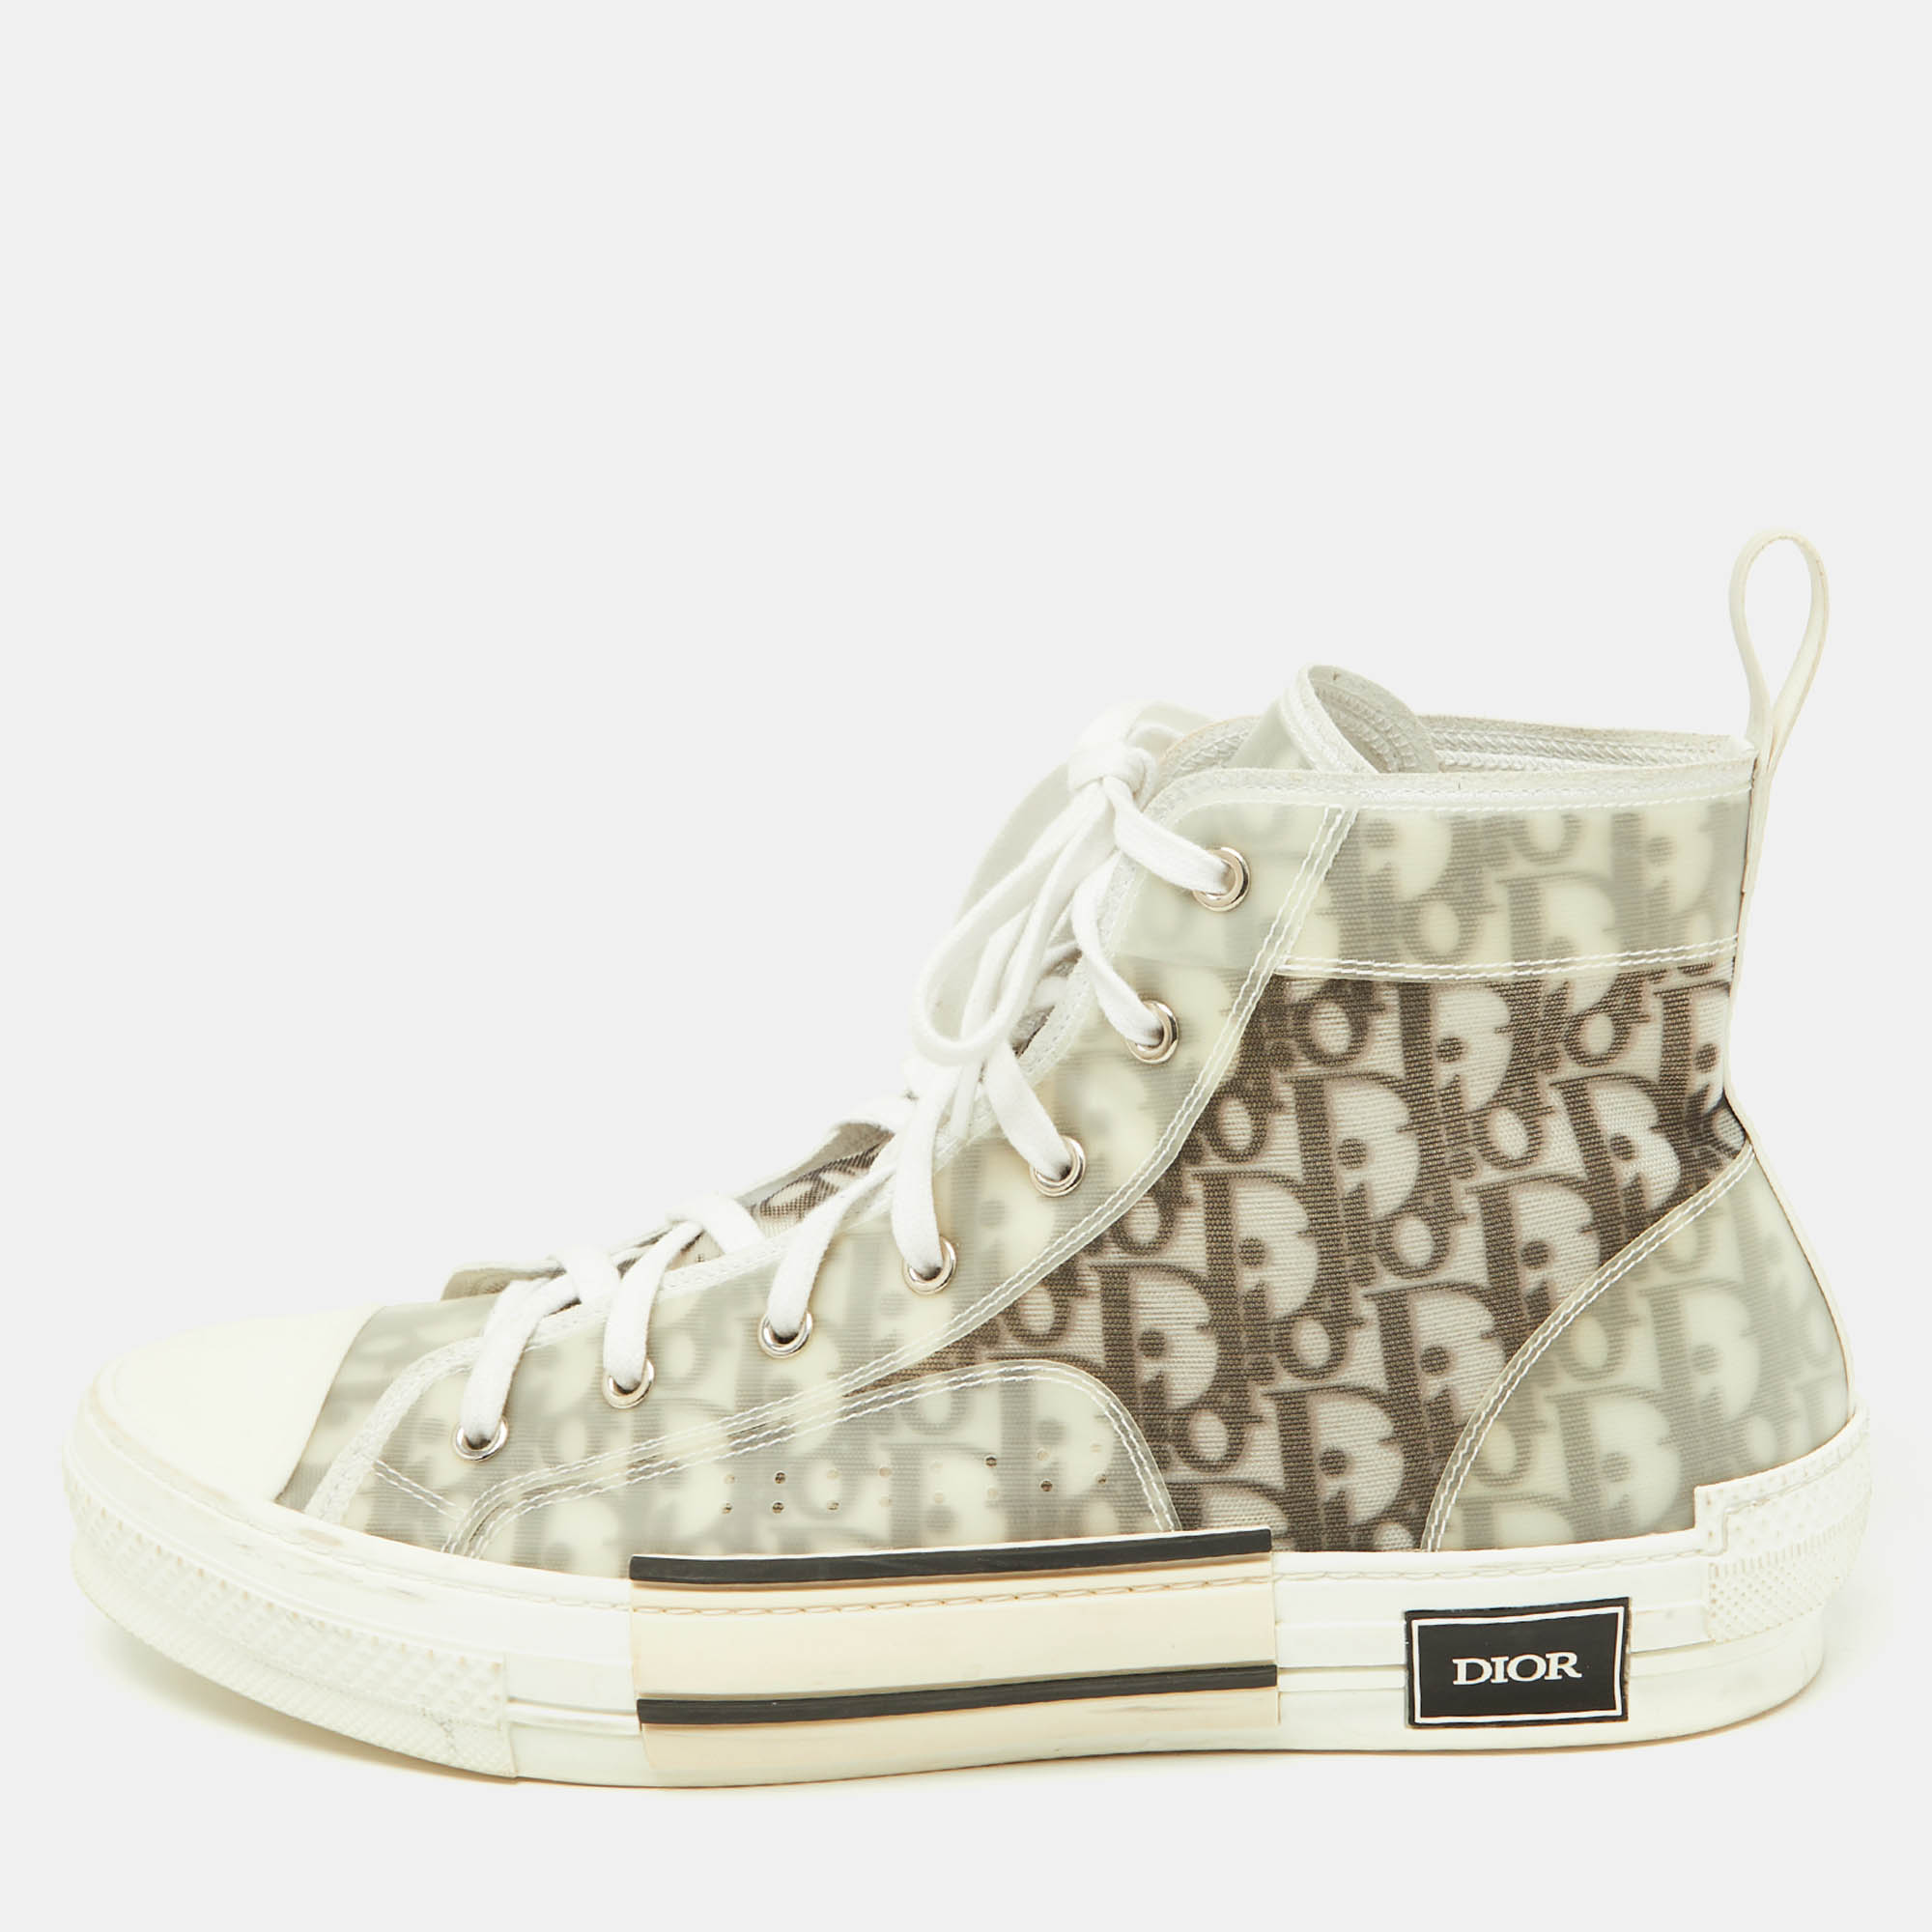 

Dior Grey/White Mesh and Rubber B23 High Top Sneakers Size